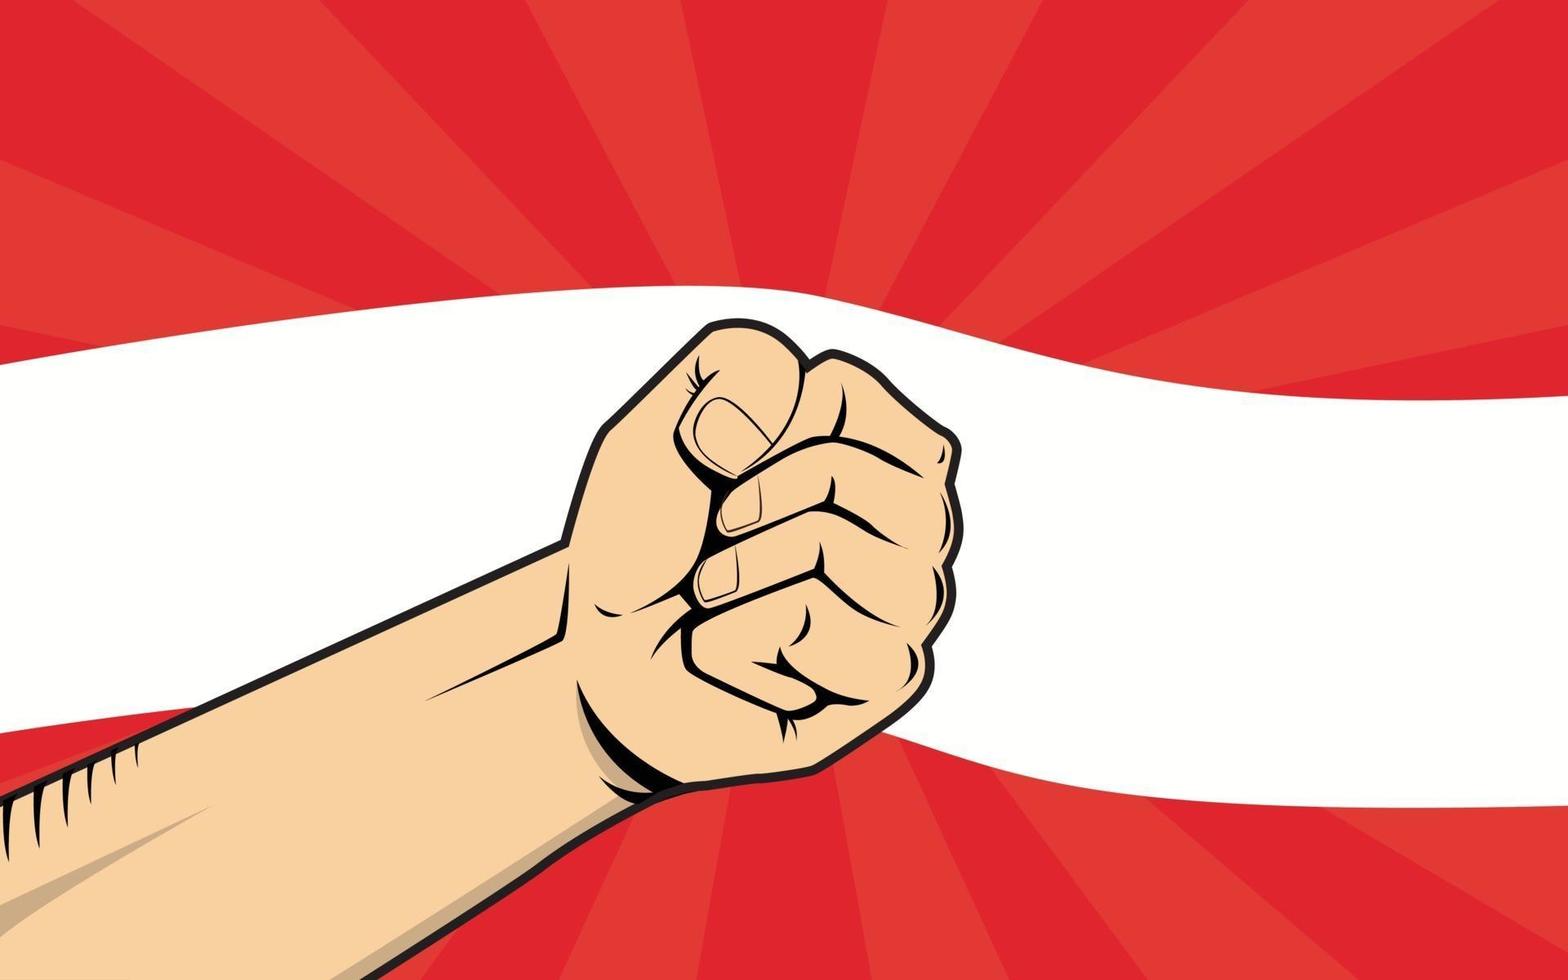 austria fight protest symbol with strong hand and flag as background vector